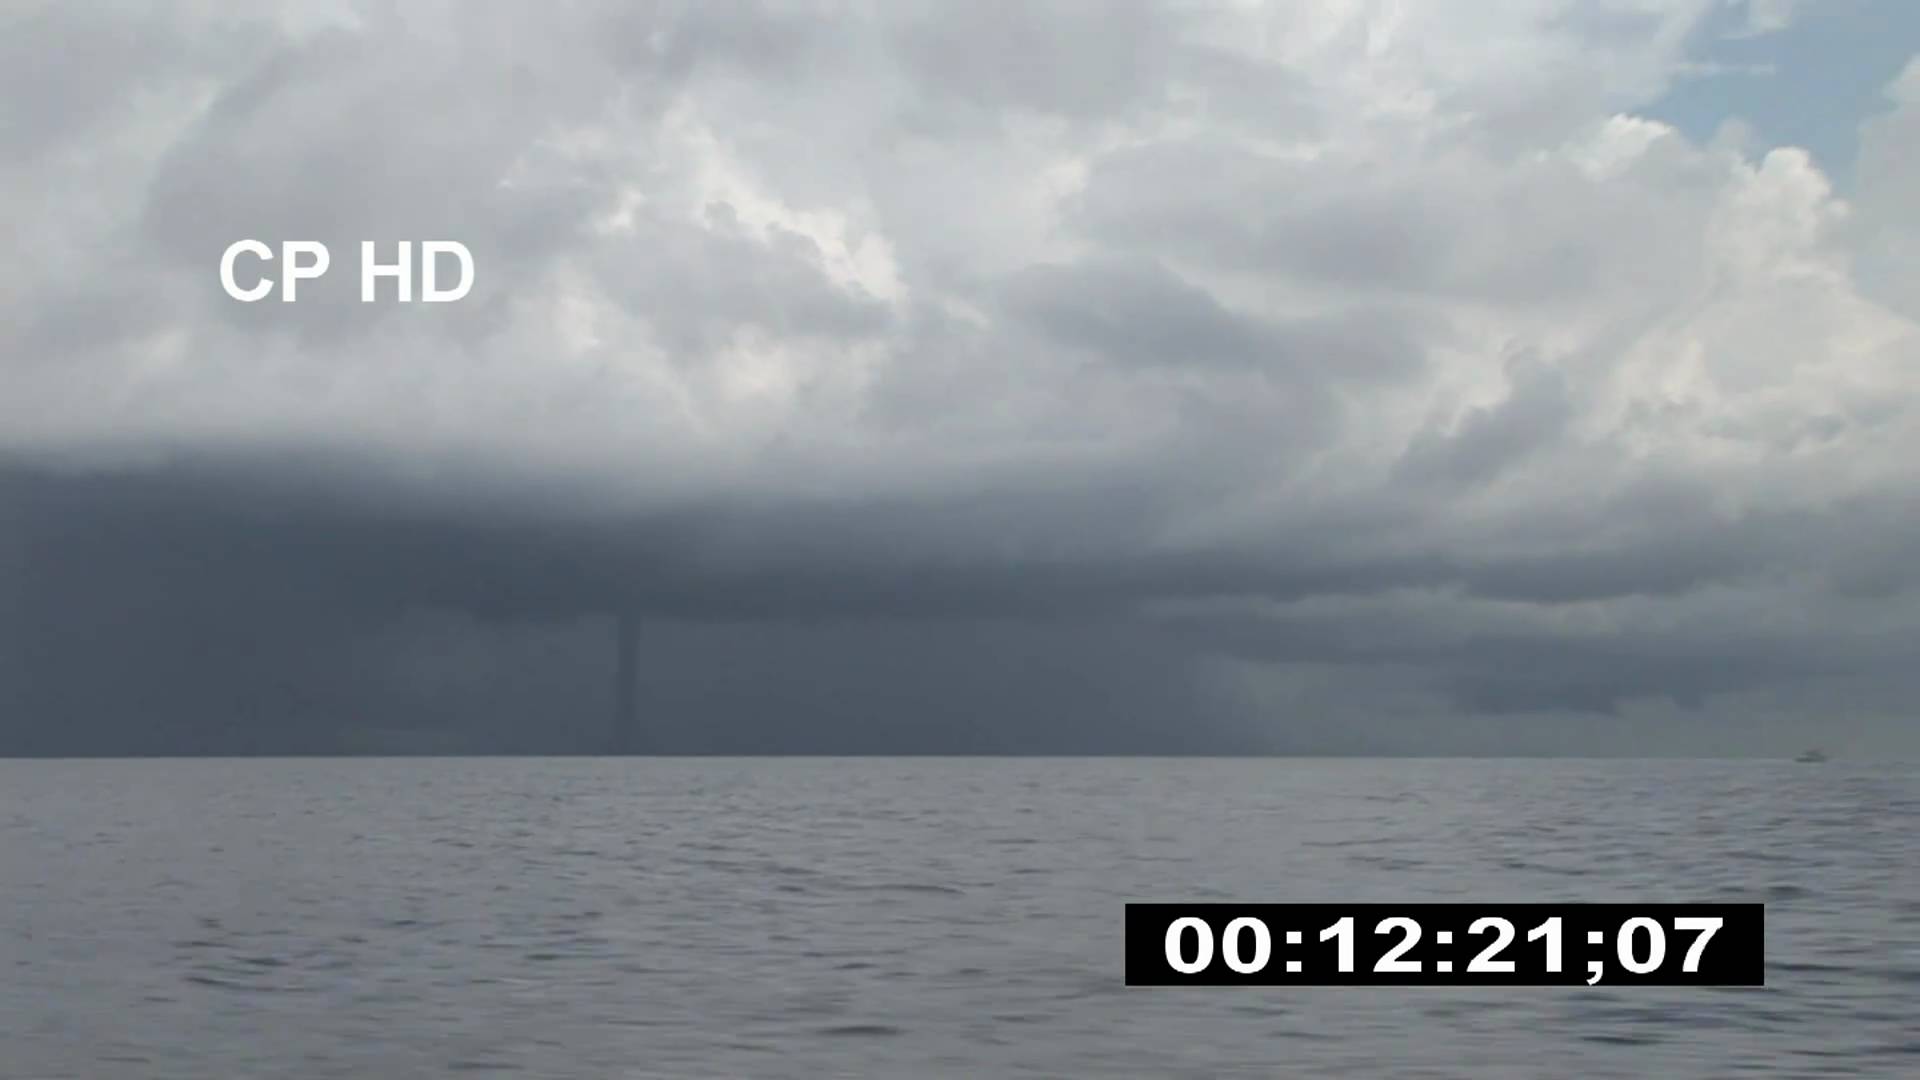 Water Spout - Best Shot - Stock Footage - Storm at Sea - Boat Pov ...